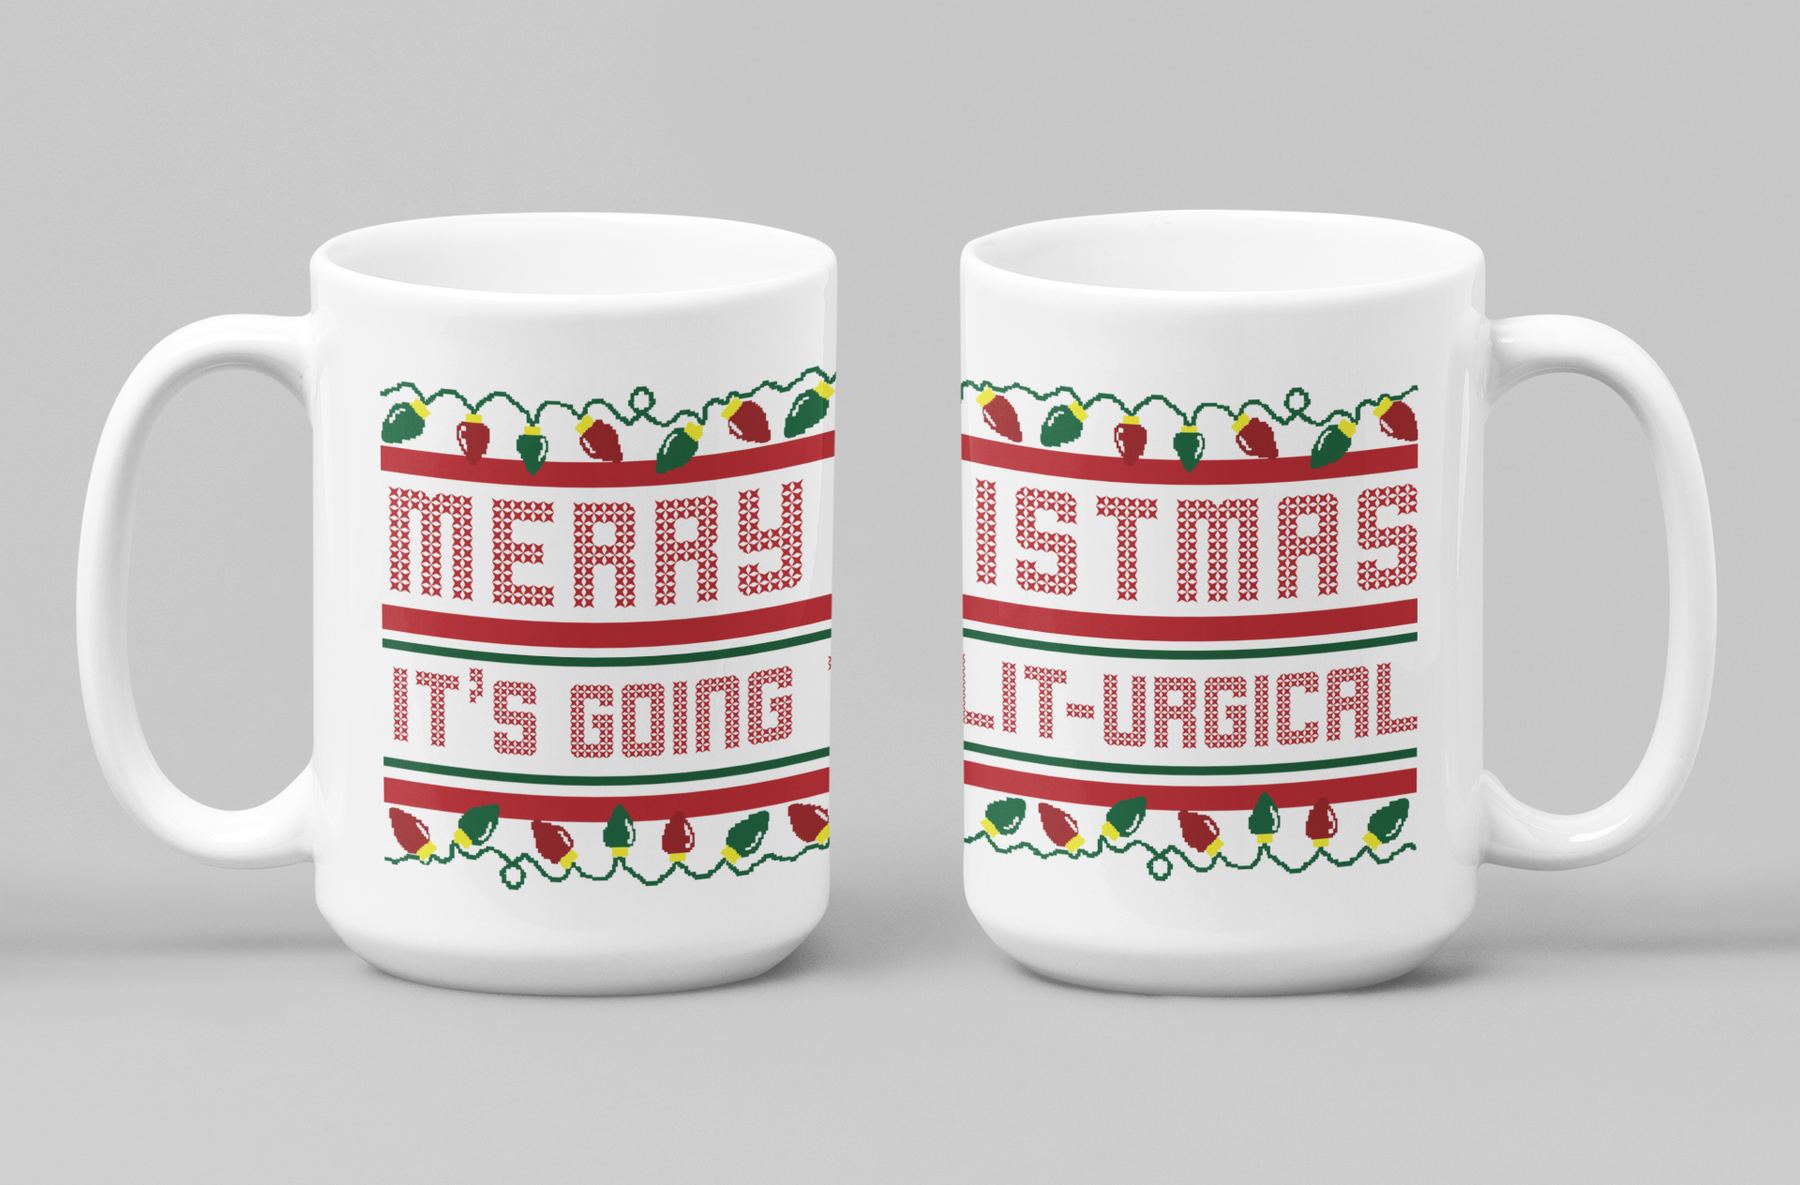 It's Going to be Lit-urgical! - Mug